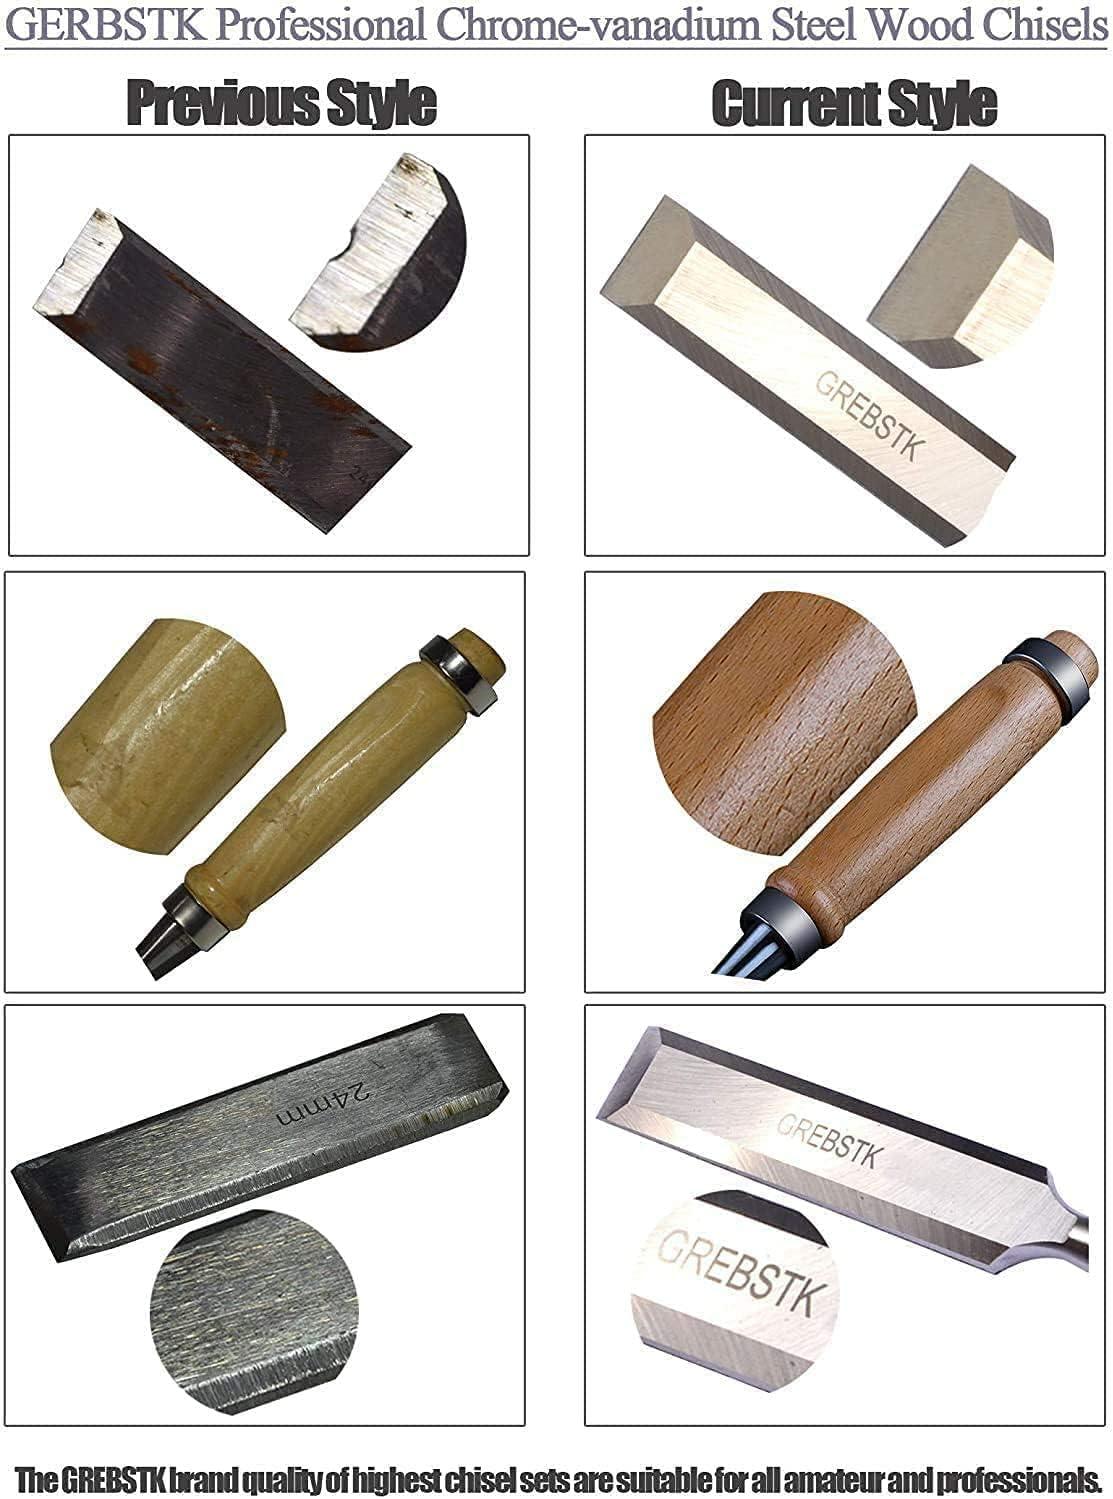 What are The Different Types of Woodworking Chisels?